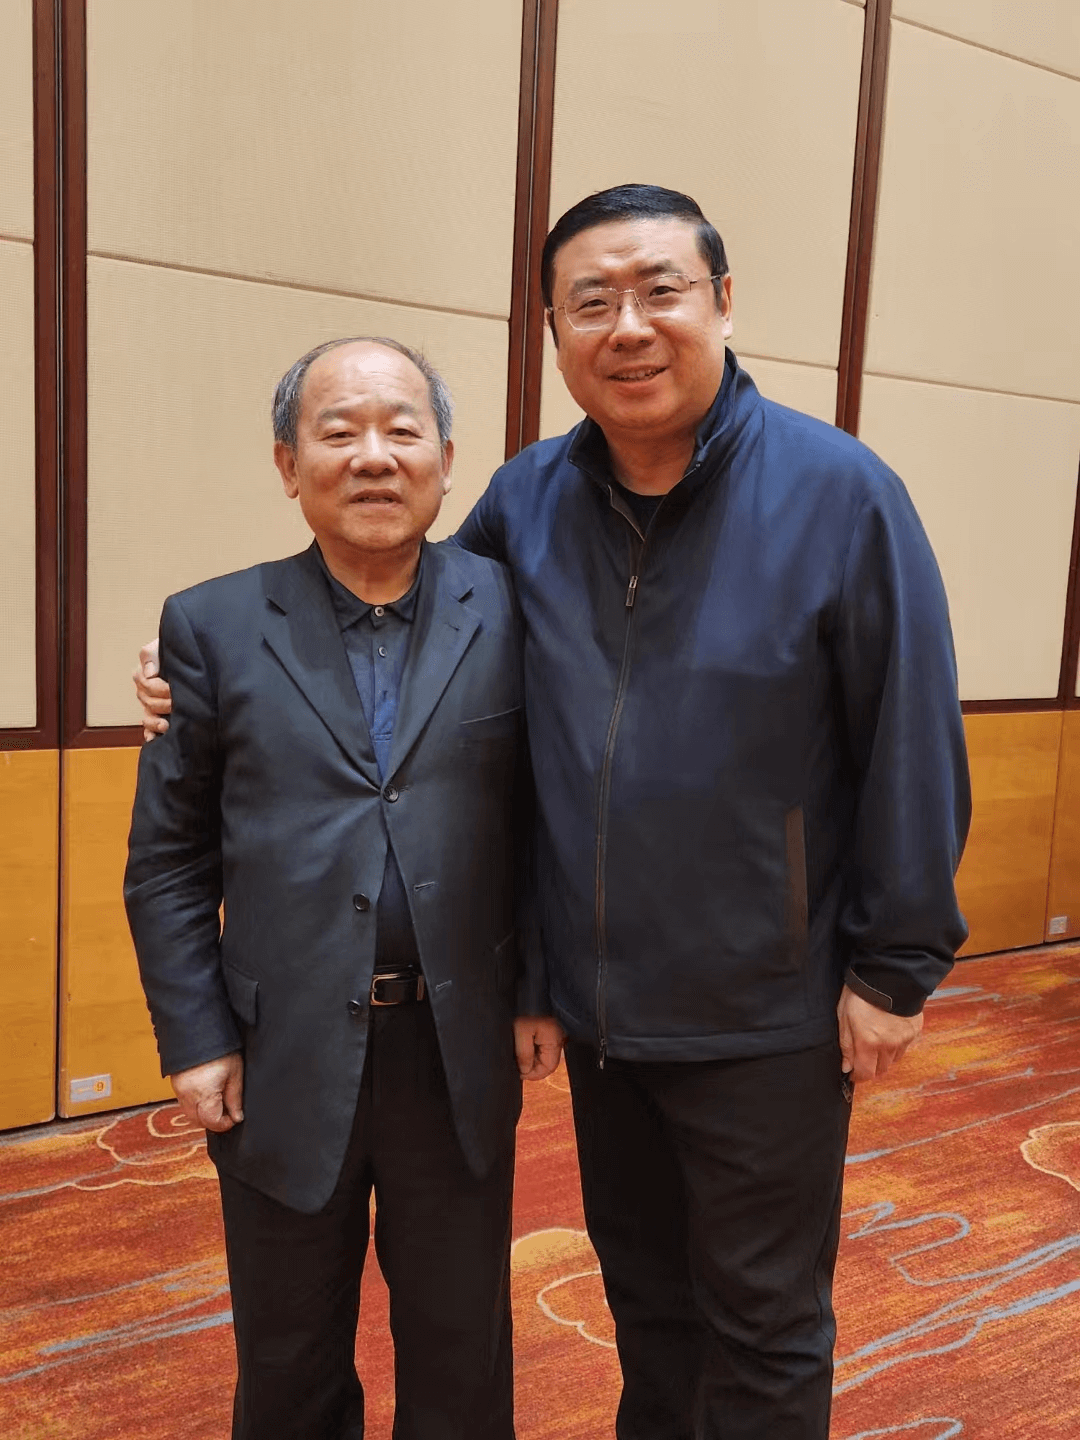 Chairman Li Yong took a photo with Ning Jizhe, the Deputy Director of the Economic Committee and Standing Committee of the CPPCC National Committee